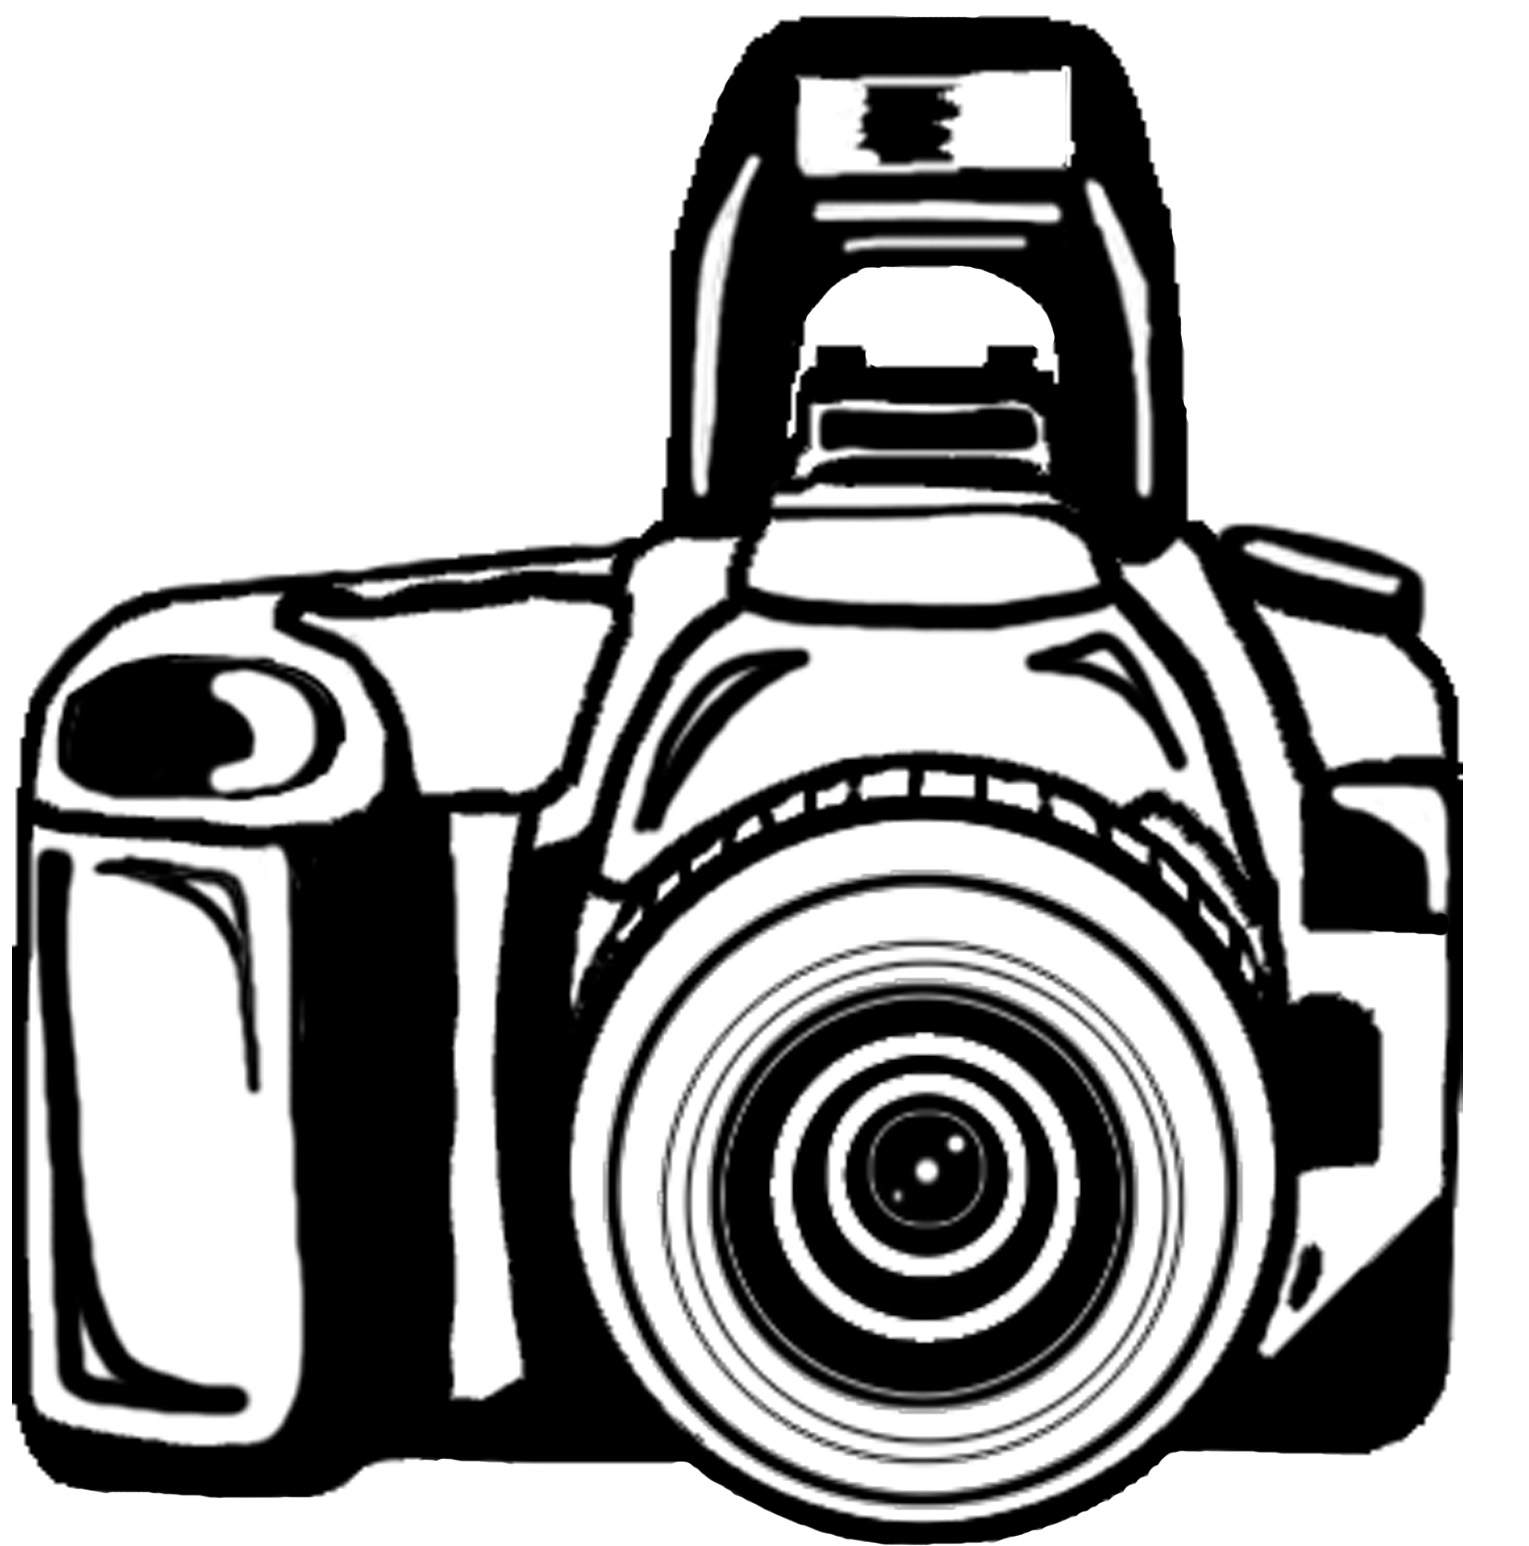 Clipart camera template. Free line art download